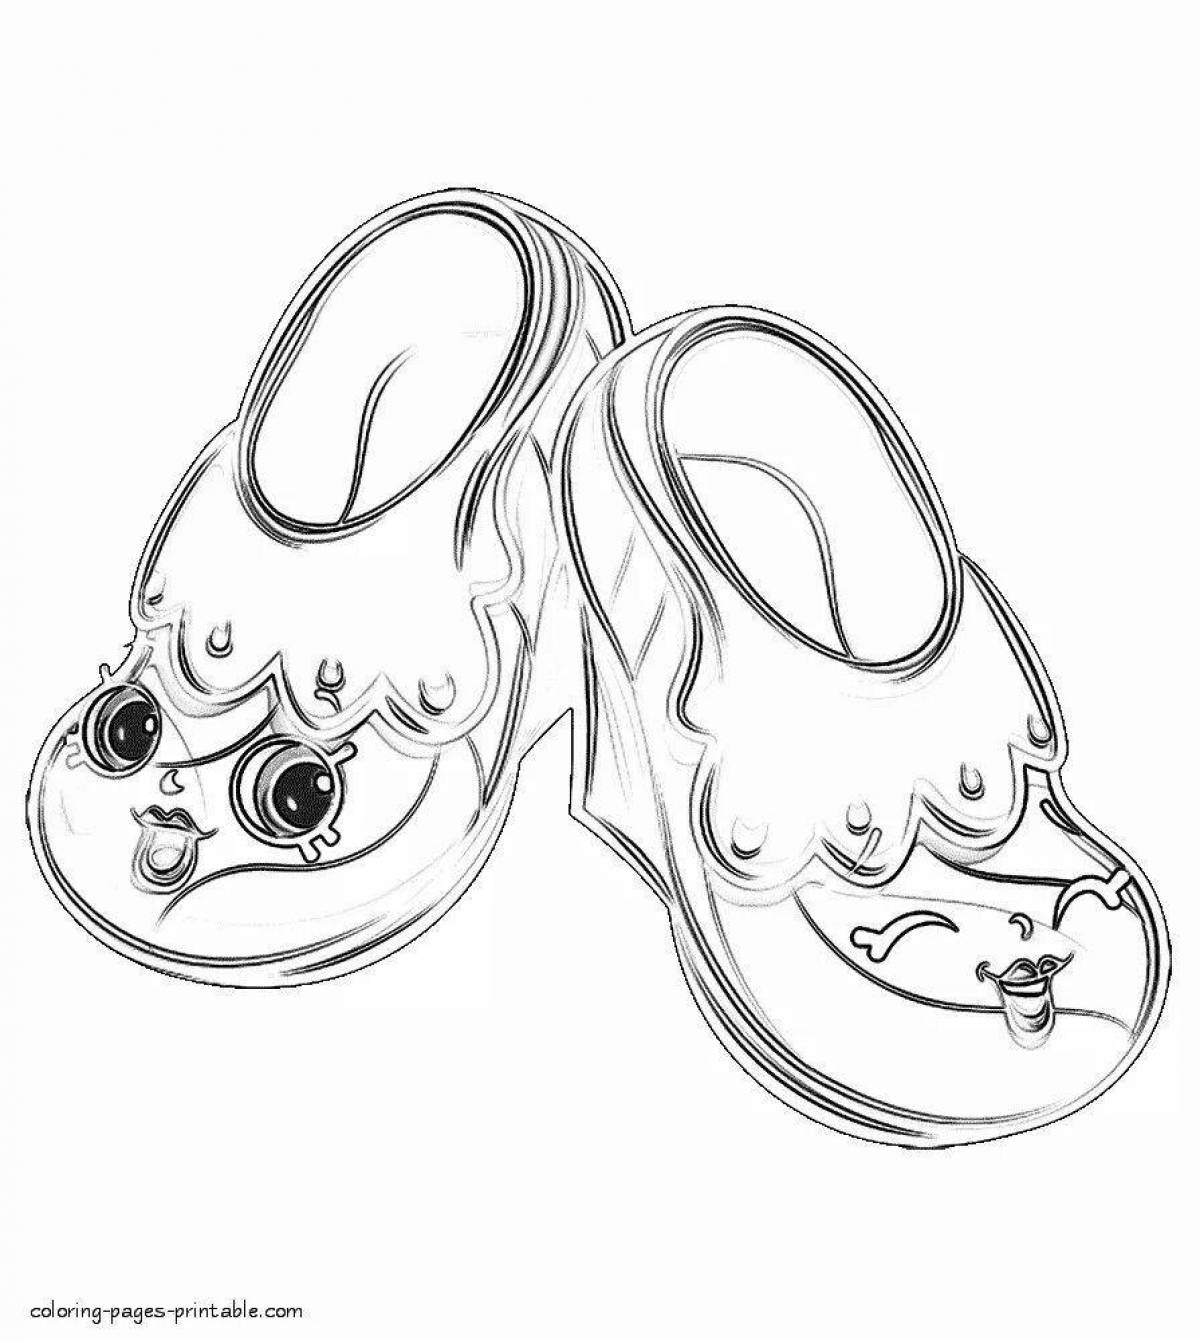 Coloring page wonderful slippers